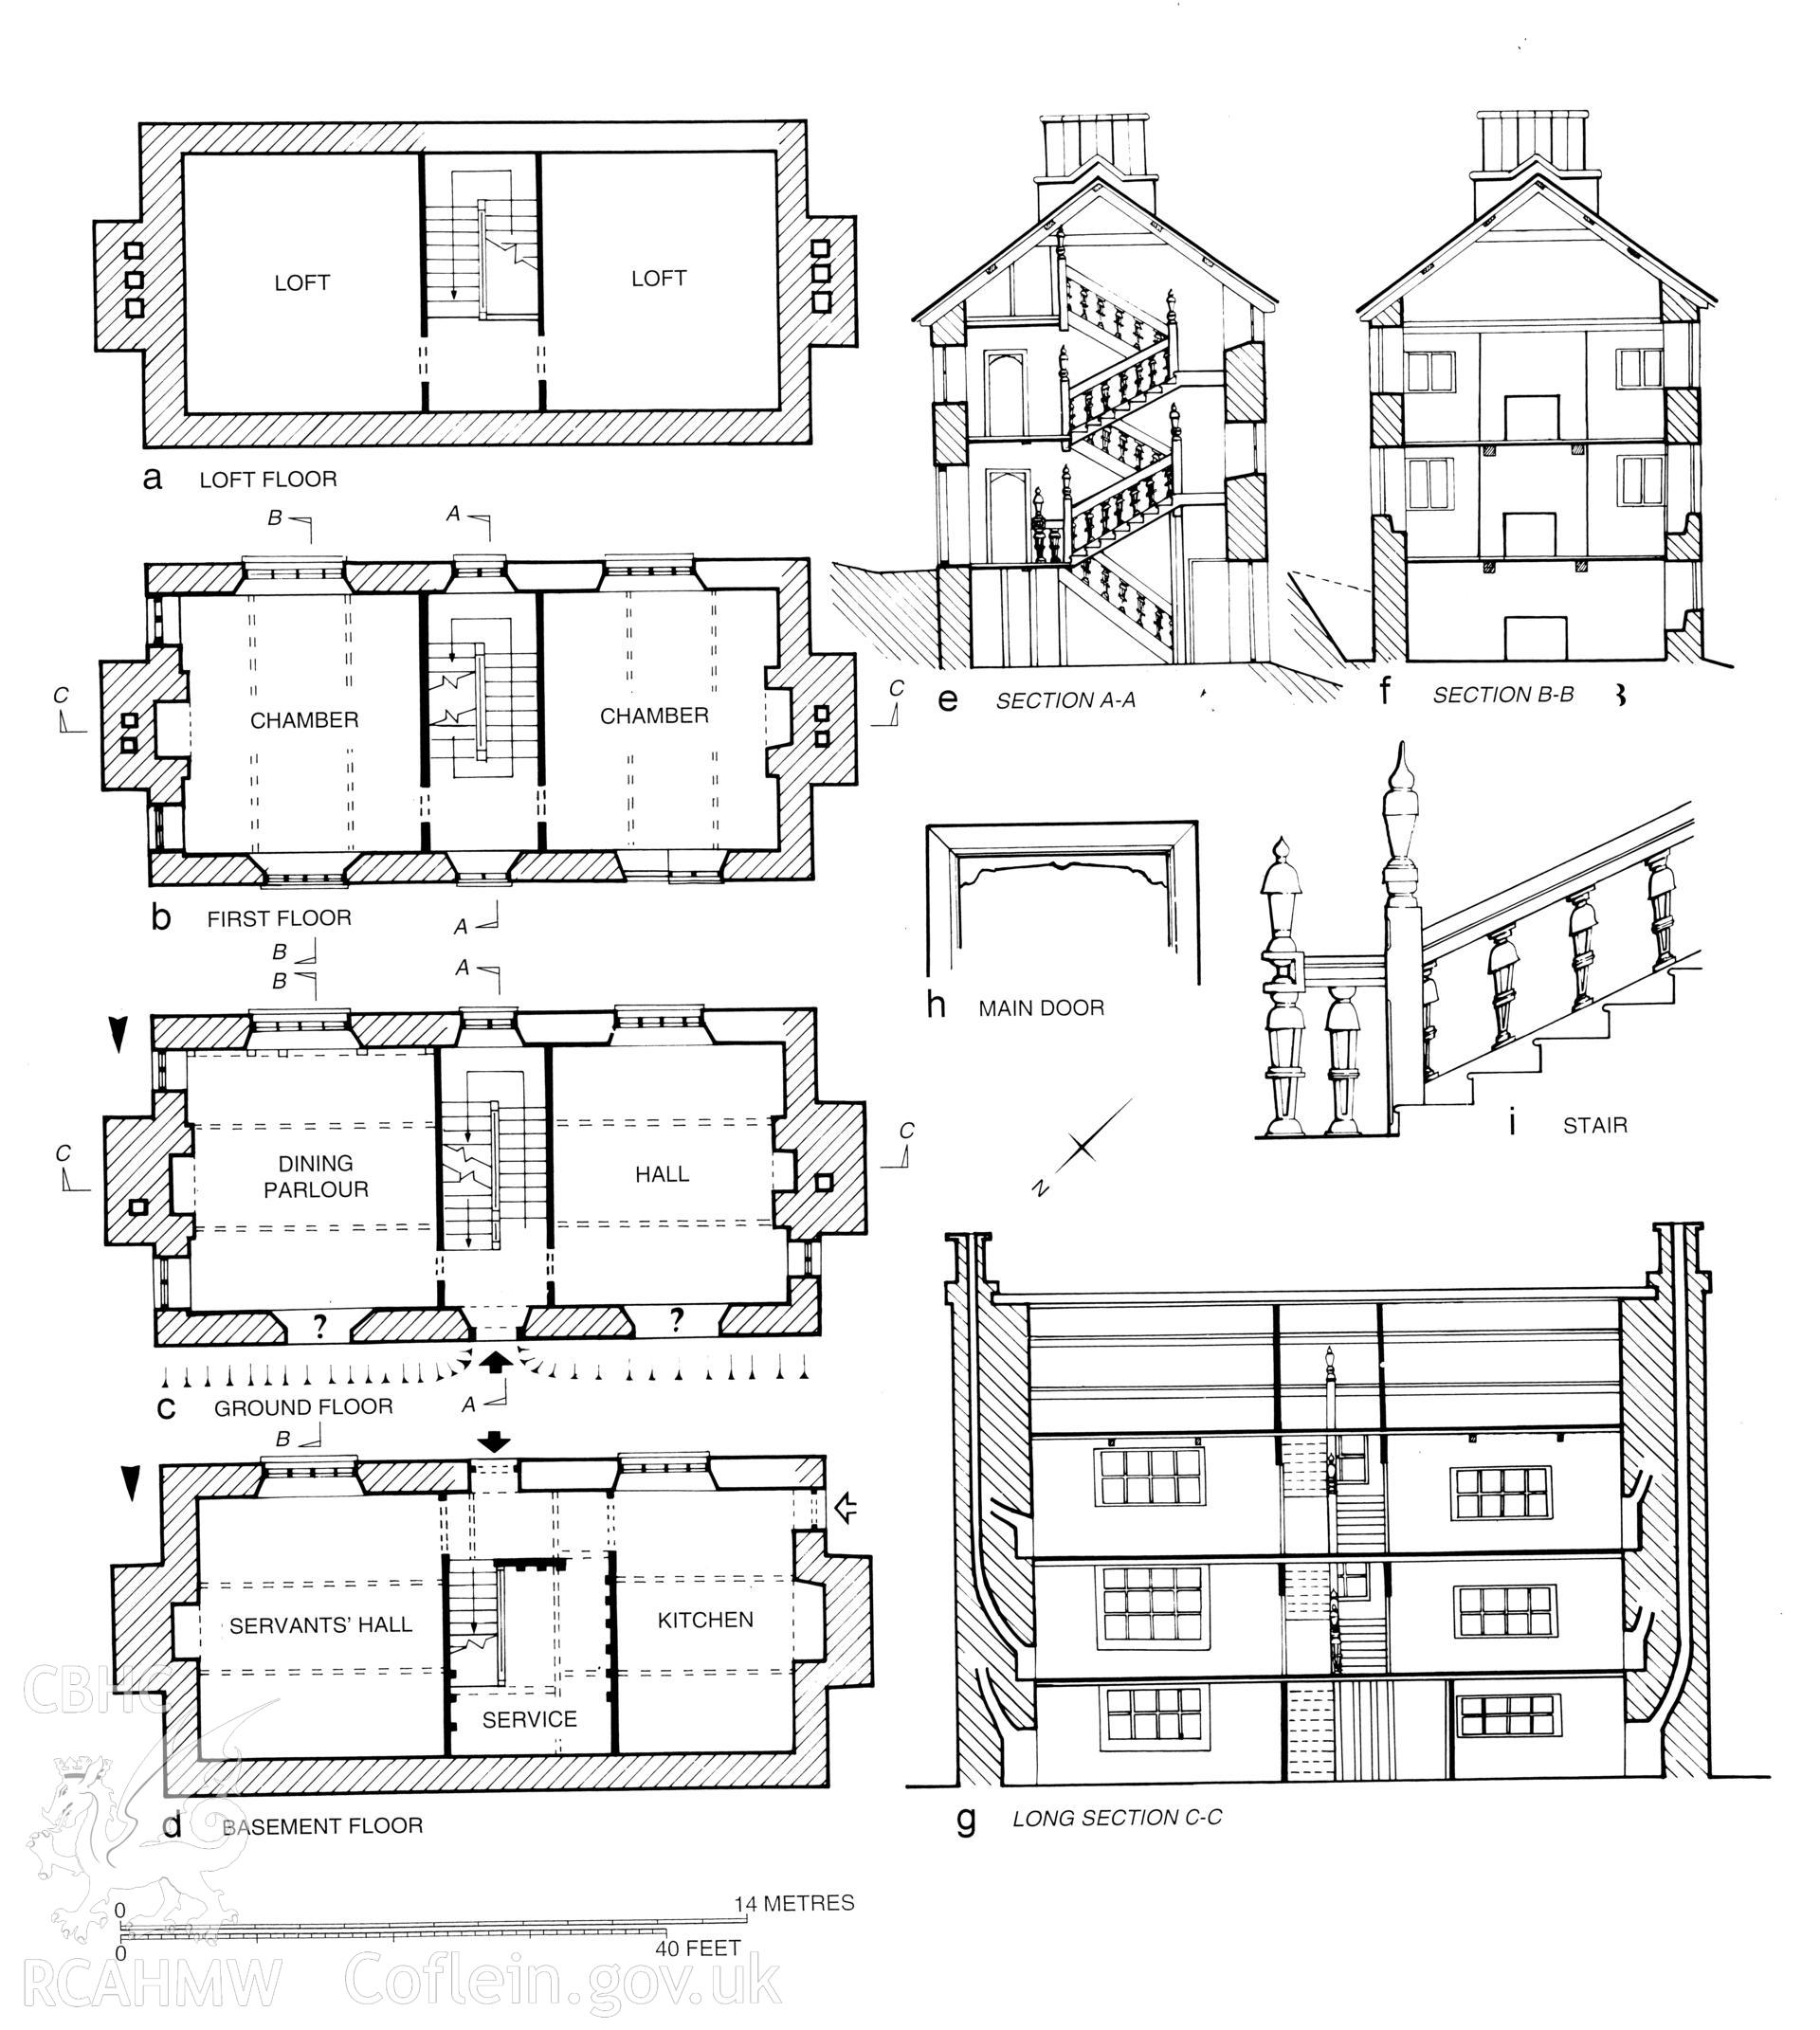 Devanner, Abbey Cwmhir;  measured drawings comprising floor plans, sections and detail, as published in the RCAHMW volume, Houses and History in the Marches of Wales.  Radnorshire 1400-1800,  page 215, figure 225.